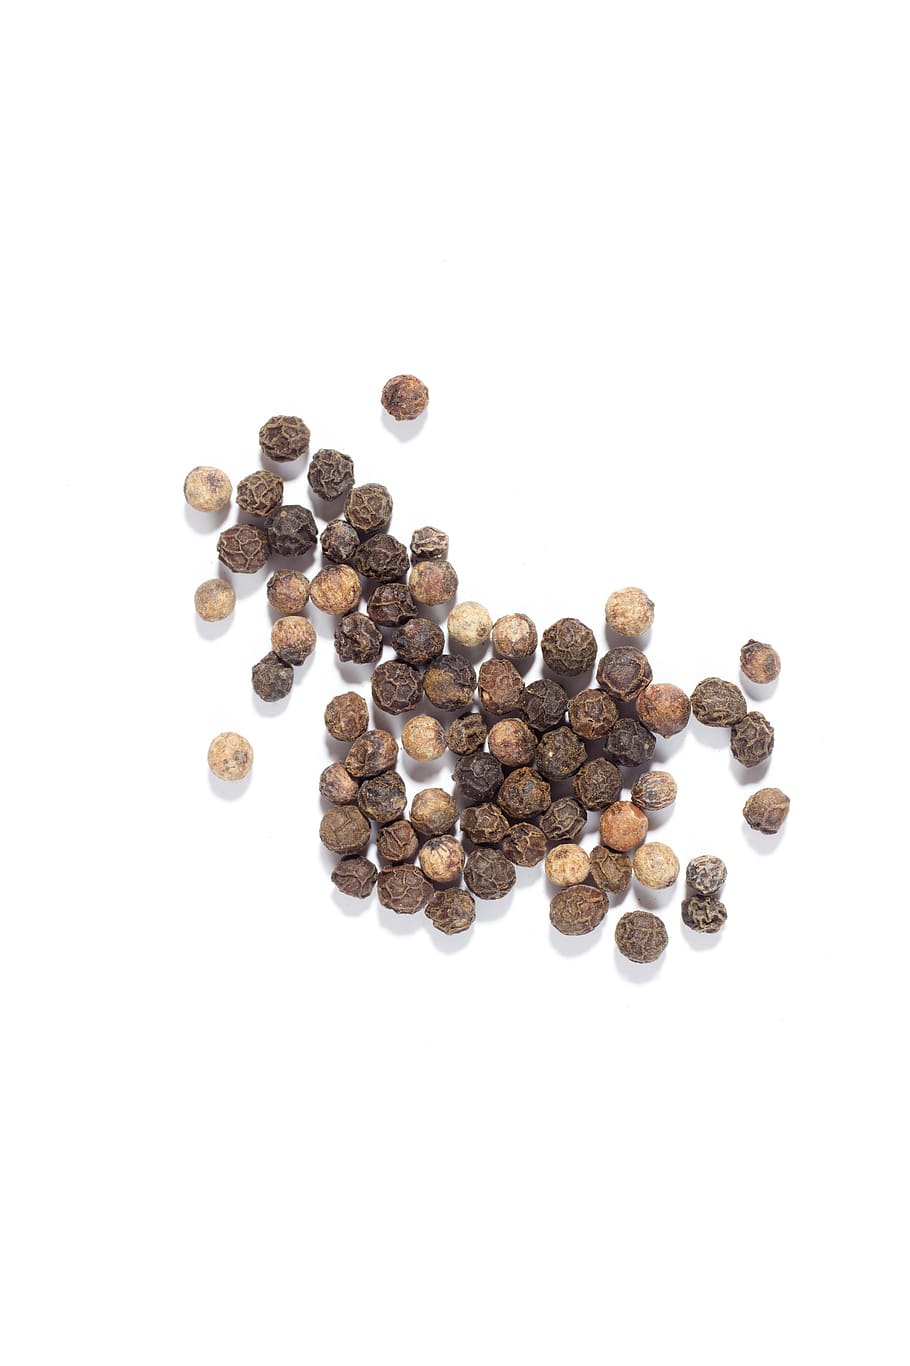 pepper, peppercorns, cropping, cook, season, sharp, kitchen, ingredients, spice, food